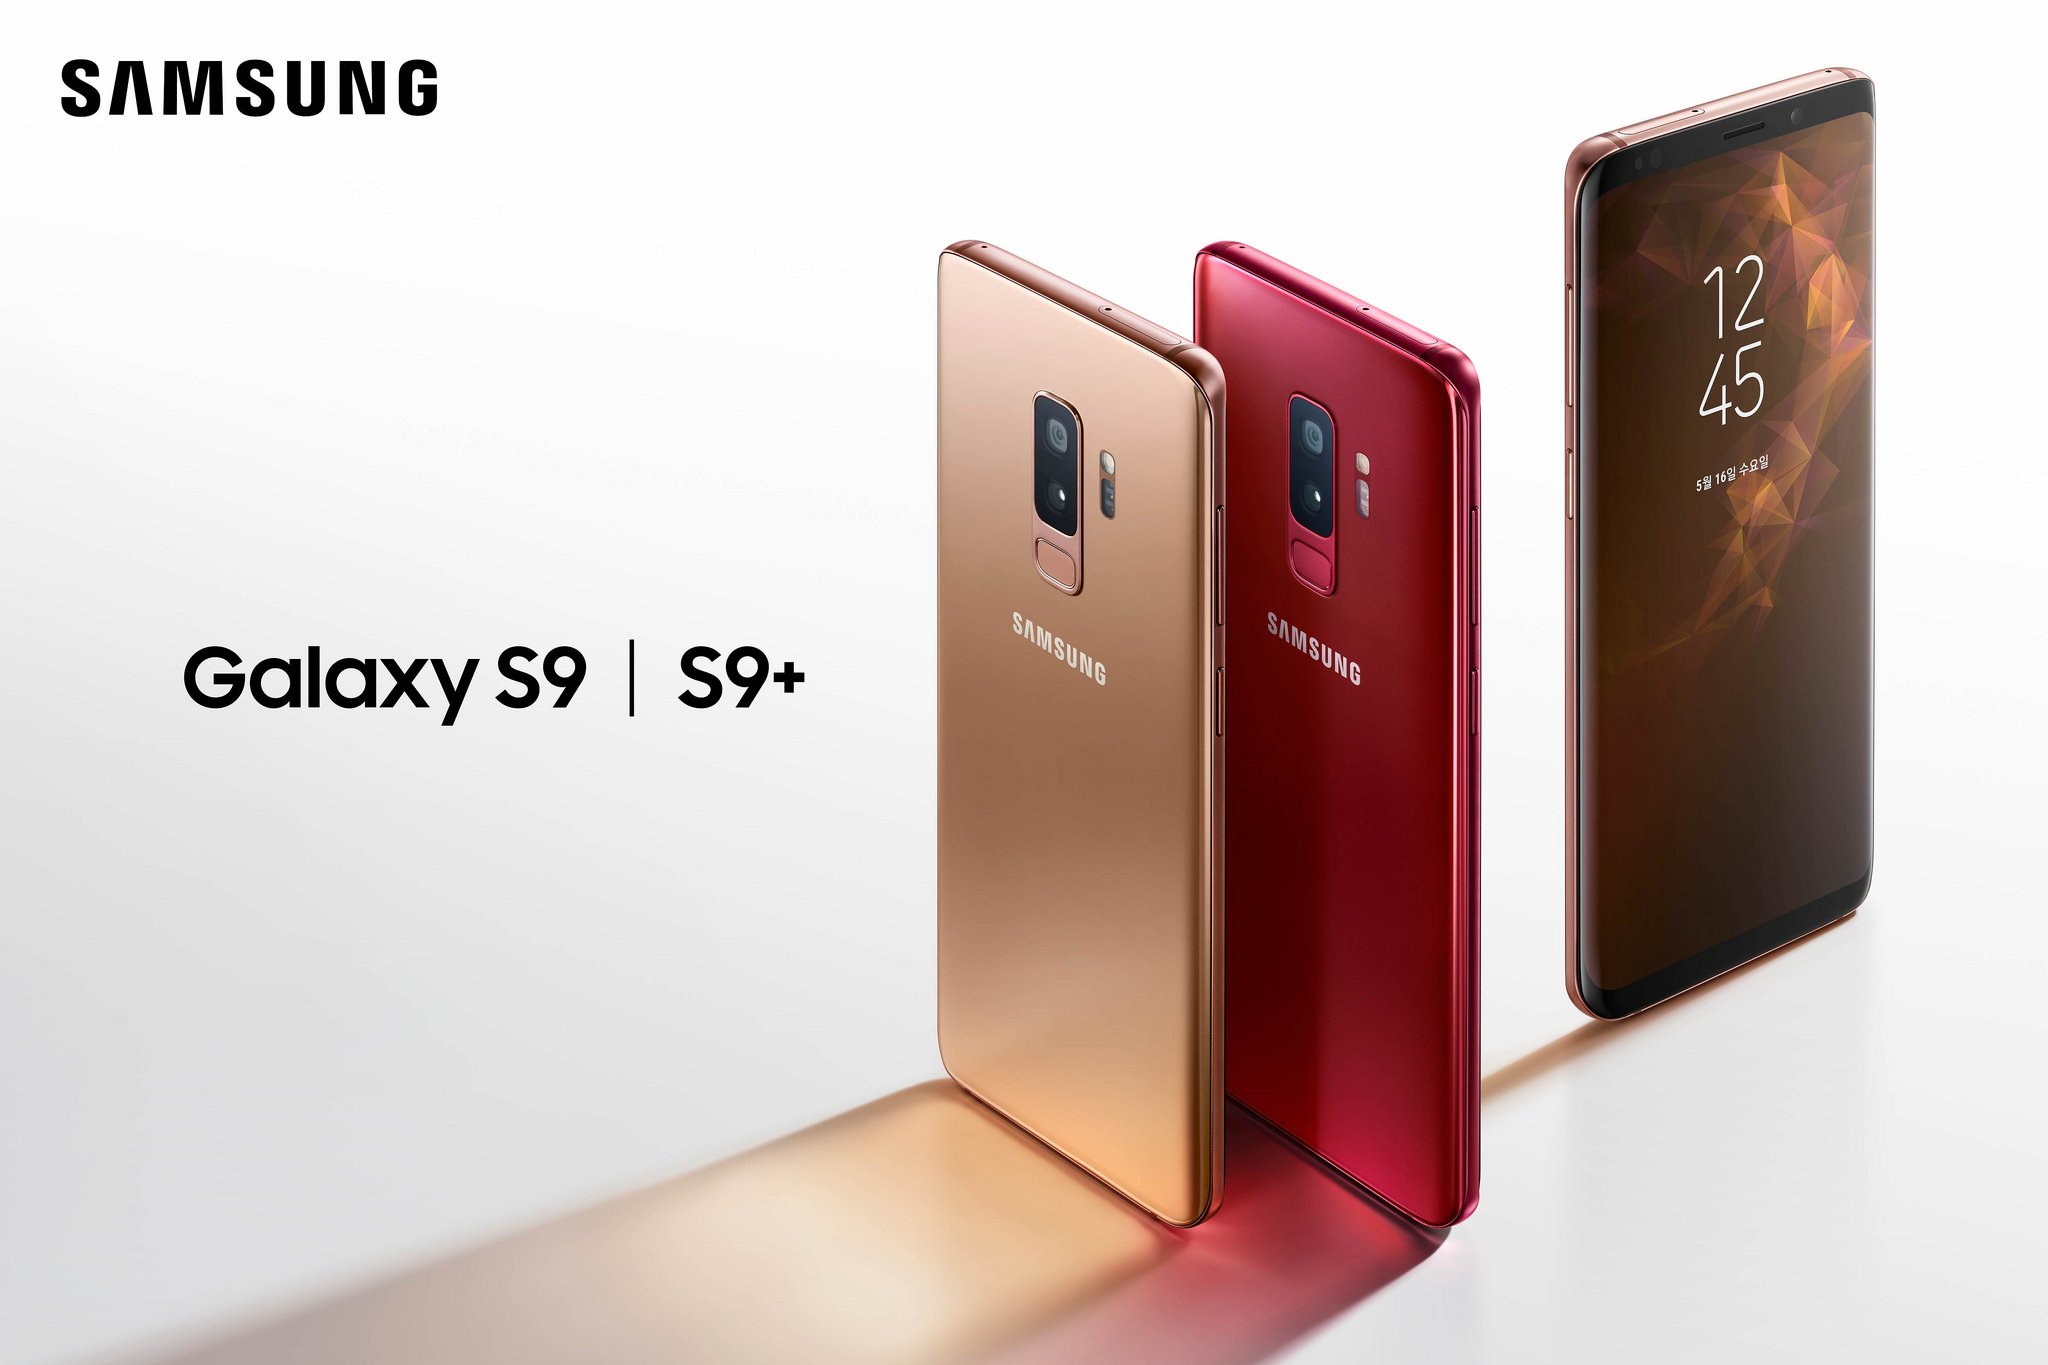 Sunrise Gold and Burgundy Red Galaxy S9 and S9+